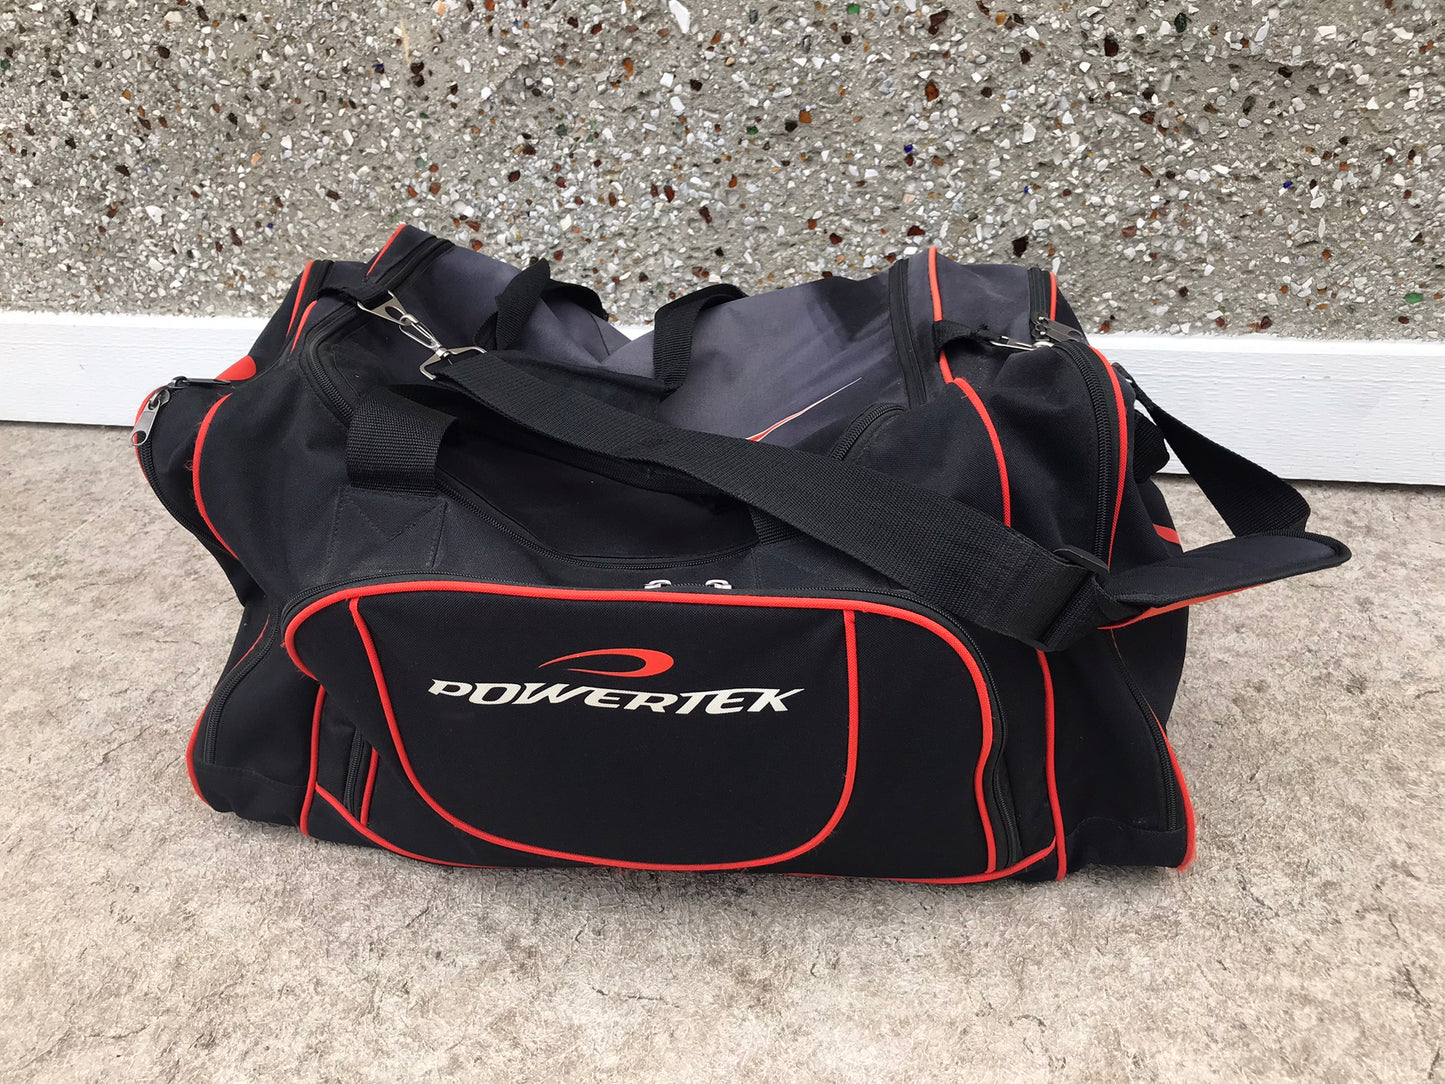 Hockey Bag Child Size Youth Works Perfect Zippers Are Perfect  Minor Fading on top